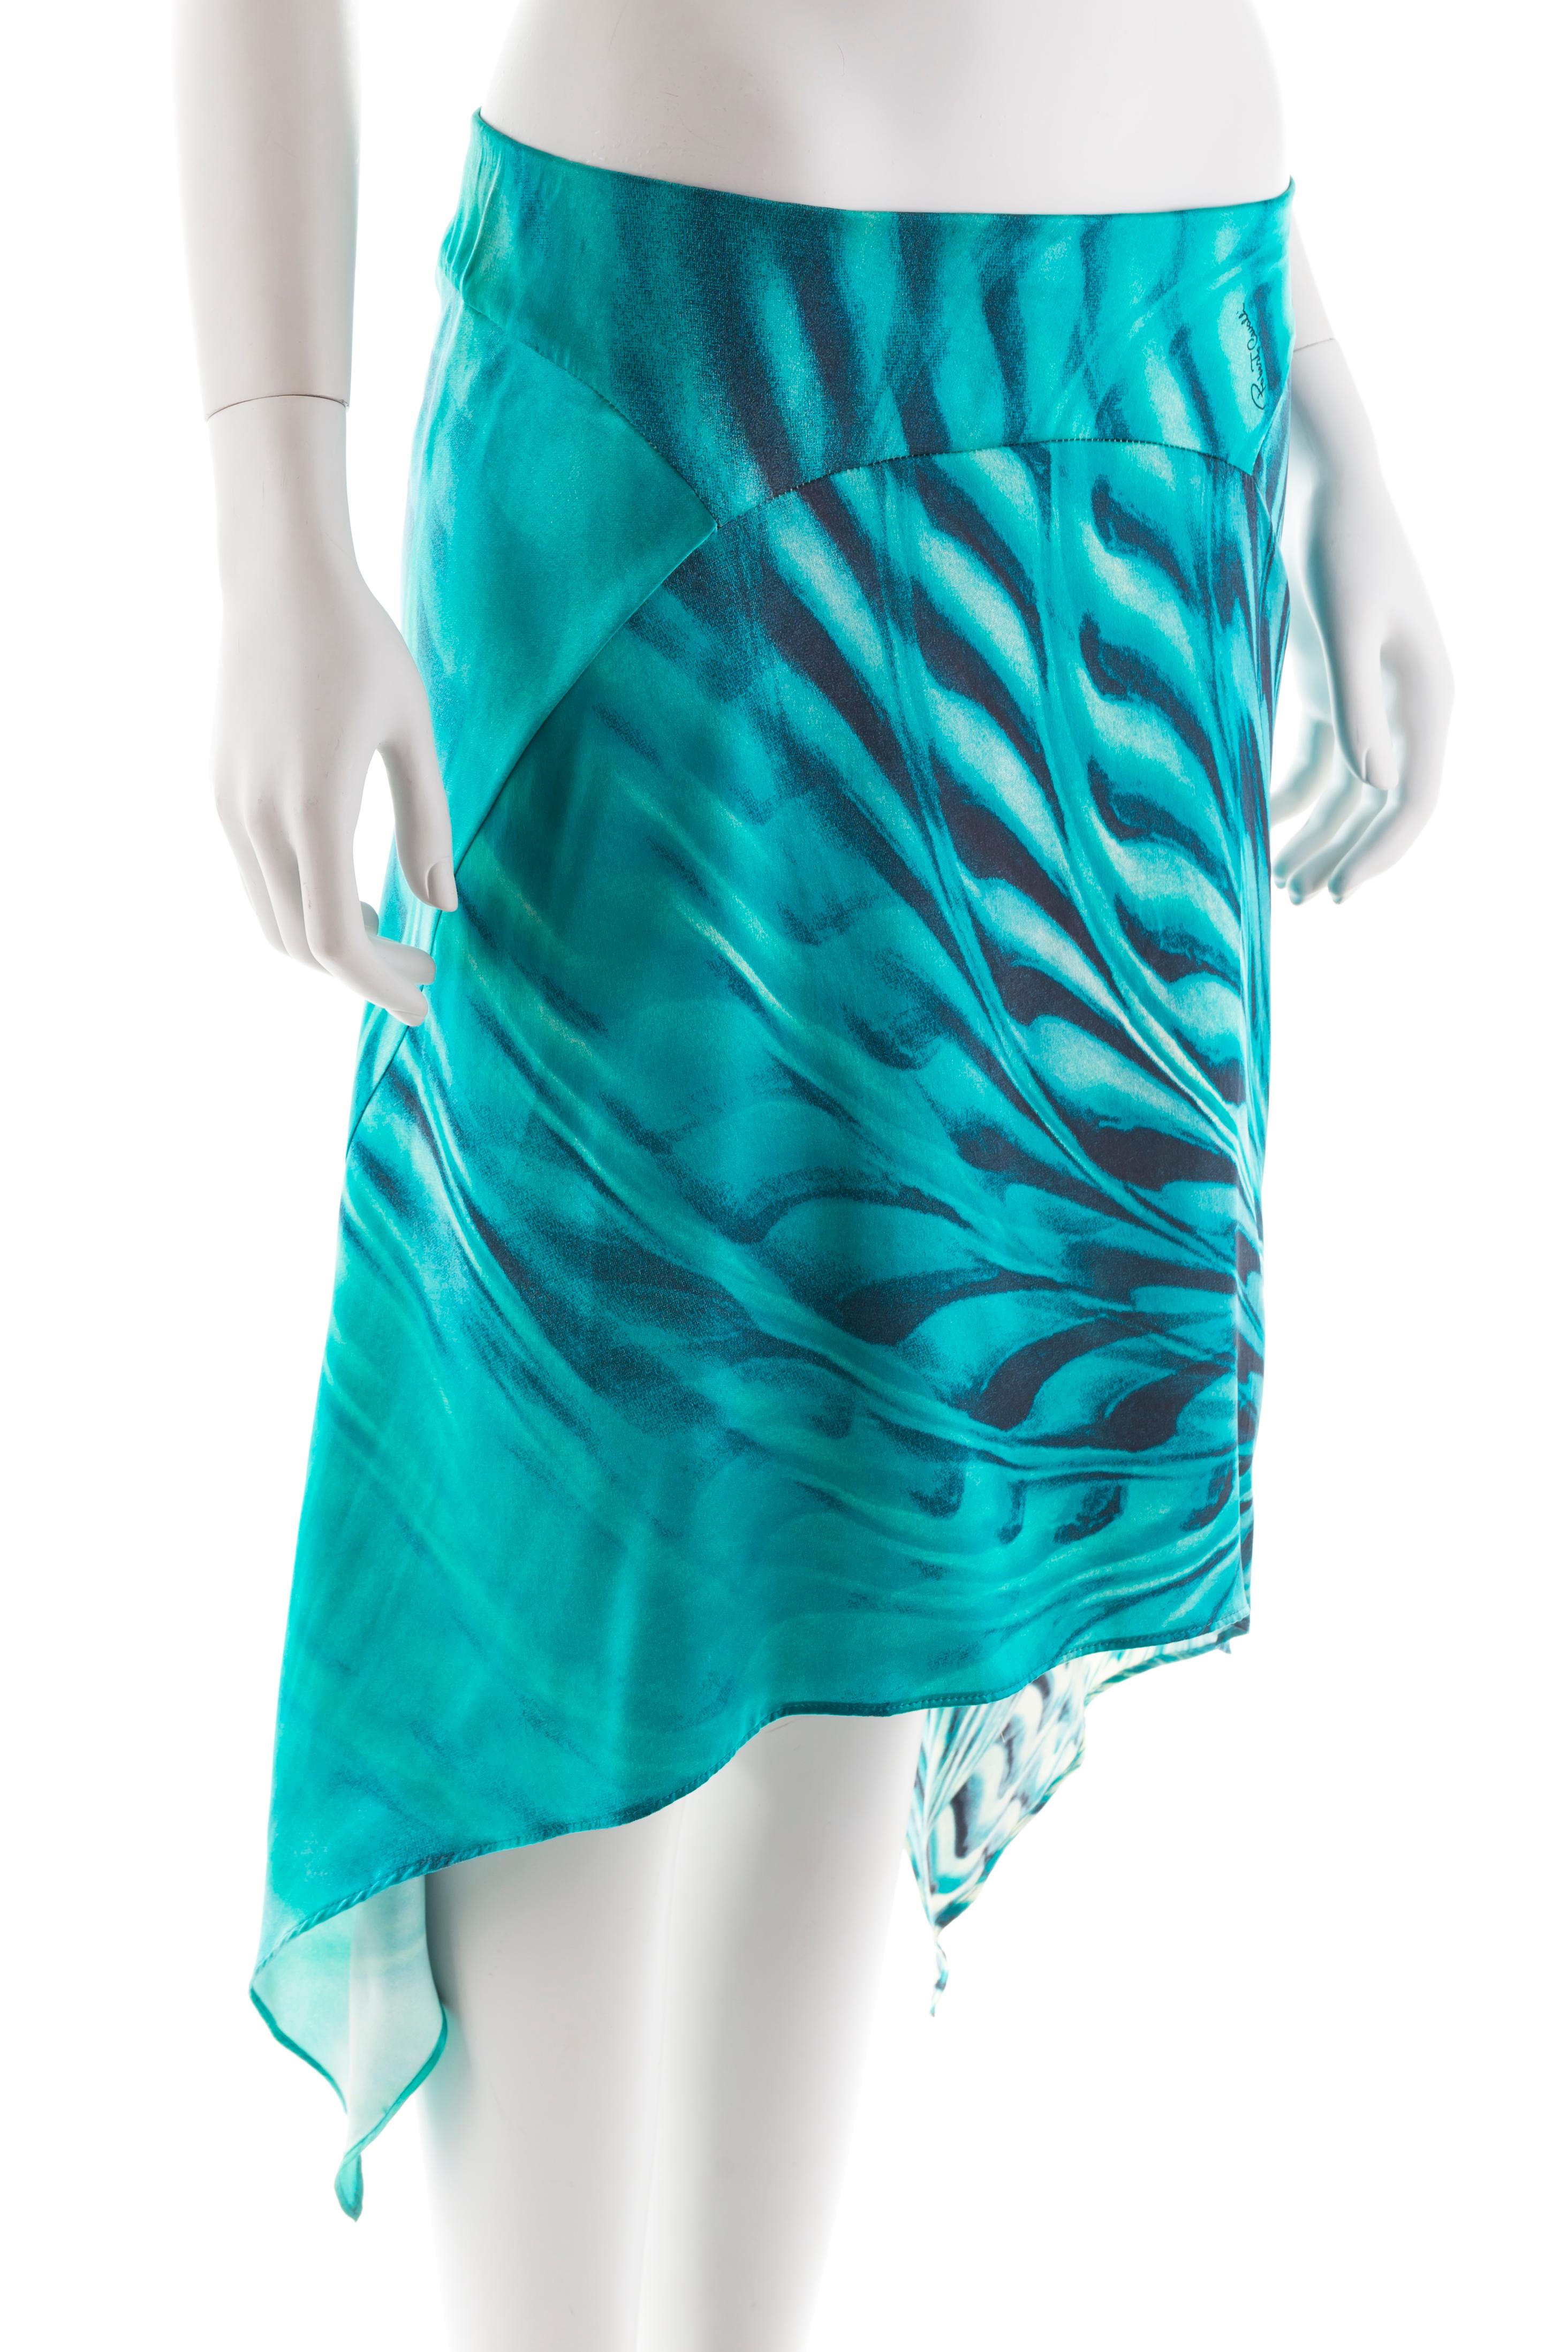 - Roberto Cavalli asymmetric silk midi skirt
- Sold by Gold Palms Vintage
- Spring/Summer 2001
- Blue/turquoise graphic “peacock” swirl print
- Elastic waistband
- Ruffled sides
- No size label
